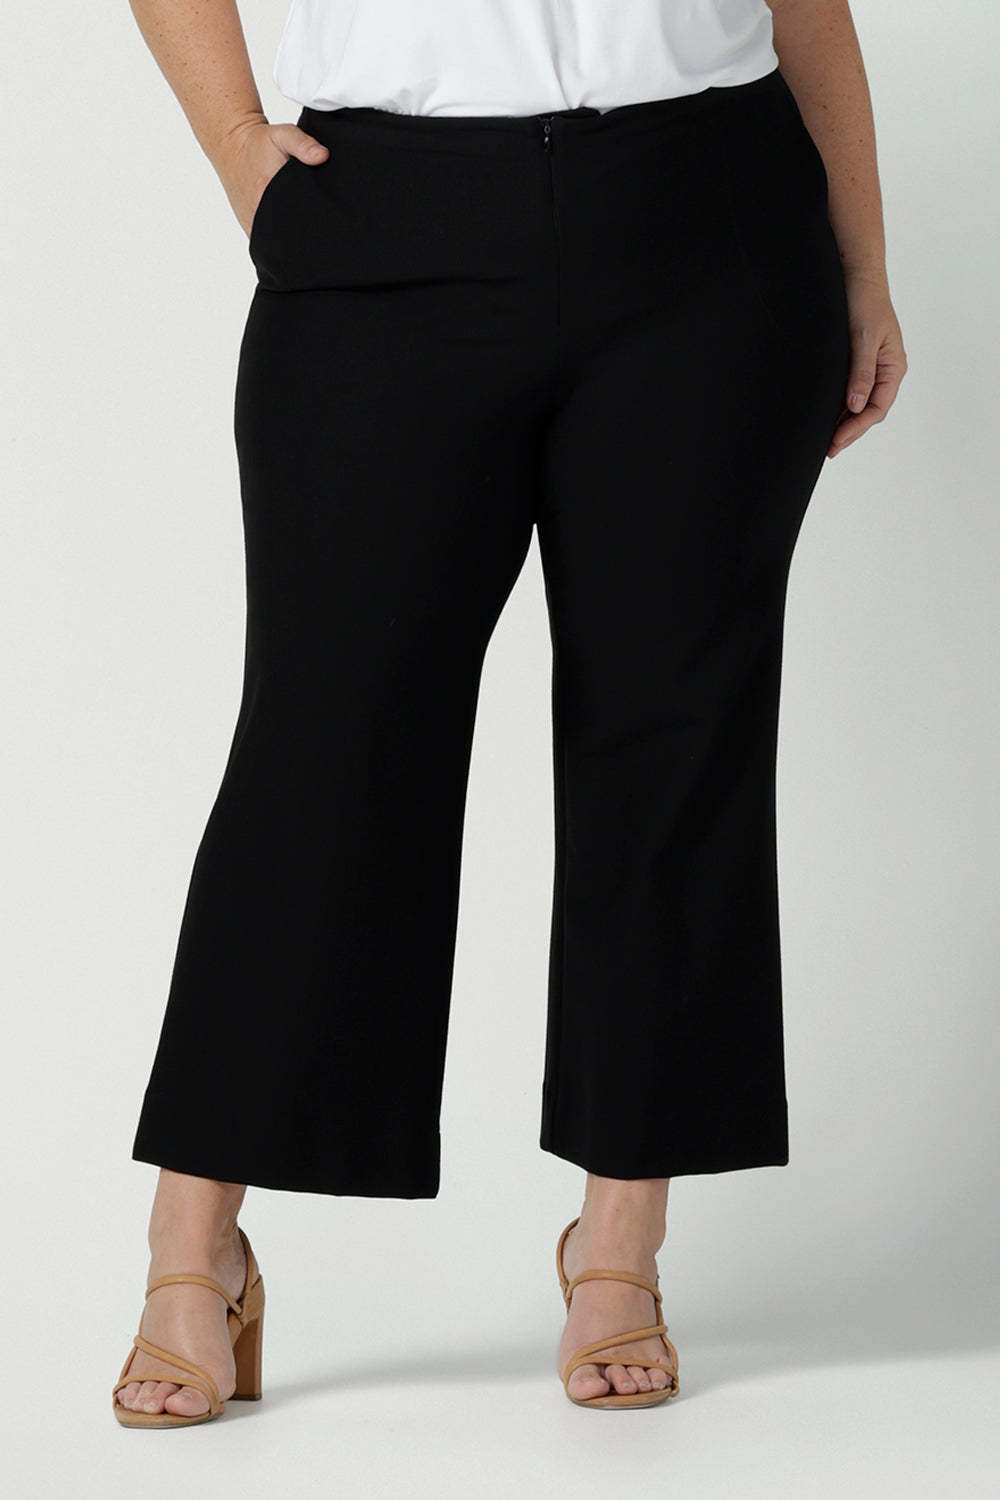 Close up of Tobie pants for curvy women, these flared leg, cropped pants are tailored for smart casual office wear. Worn with a V-neck, short sleeve top in white, and shown on a size 18 woman, these plus size black pants are made in Australia by Australian and New Zealand women's clothing brand, Leina & Fleur. Shop quality pants in sizes 8 to 24 in their online fashion boutique!